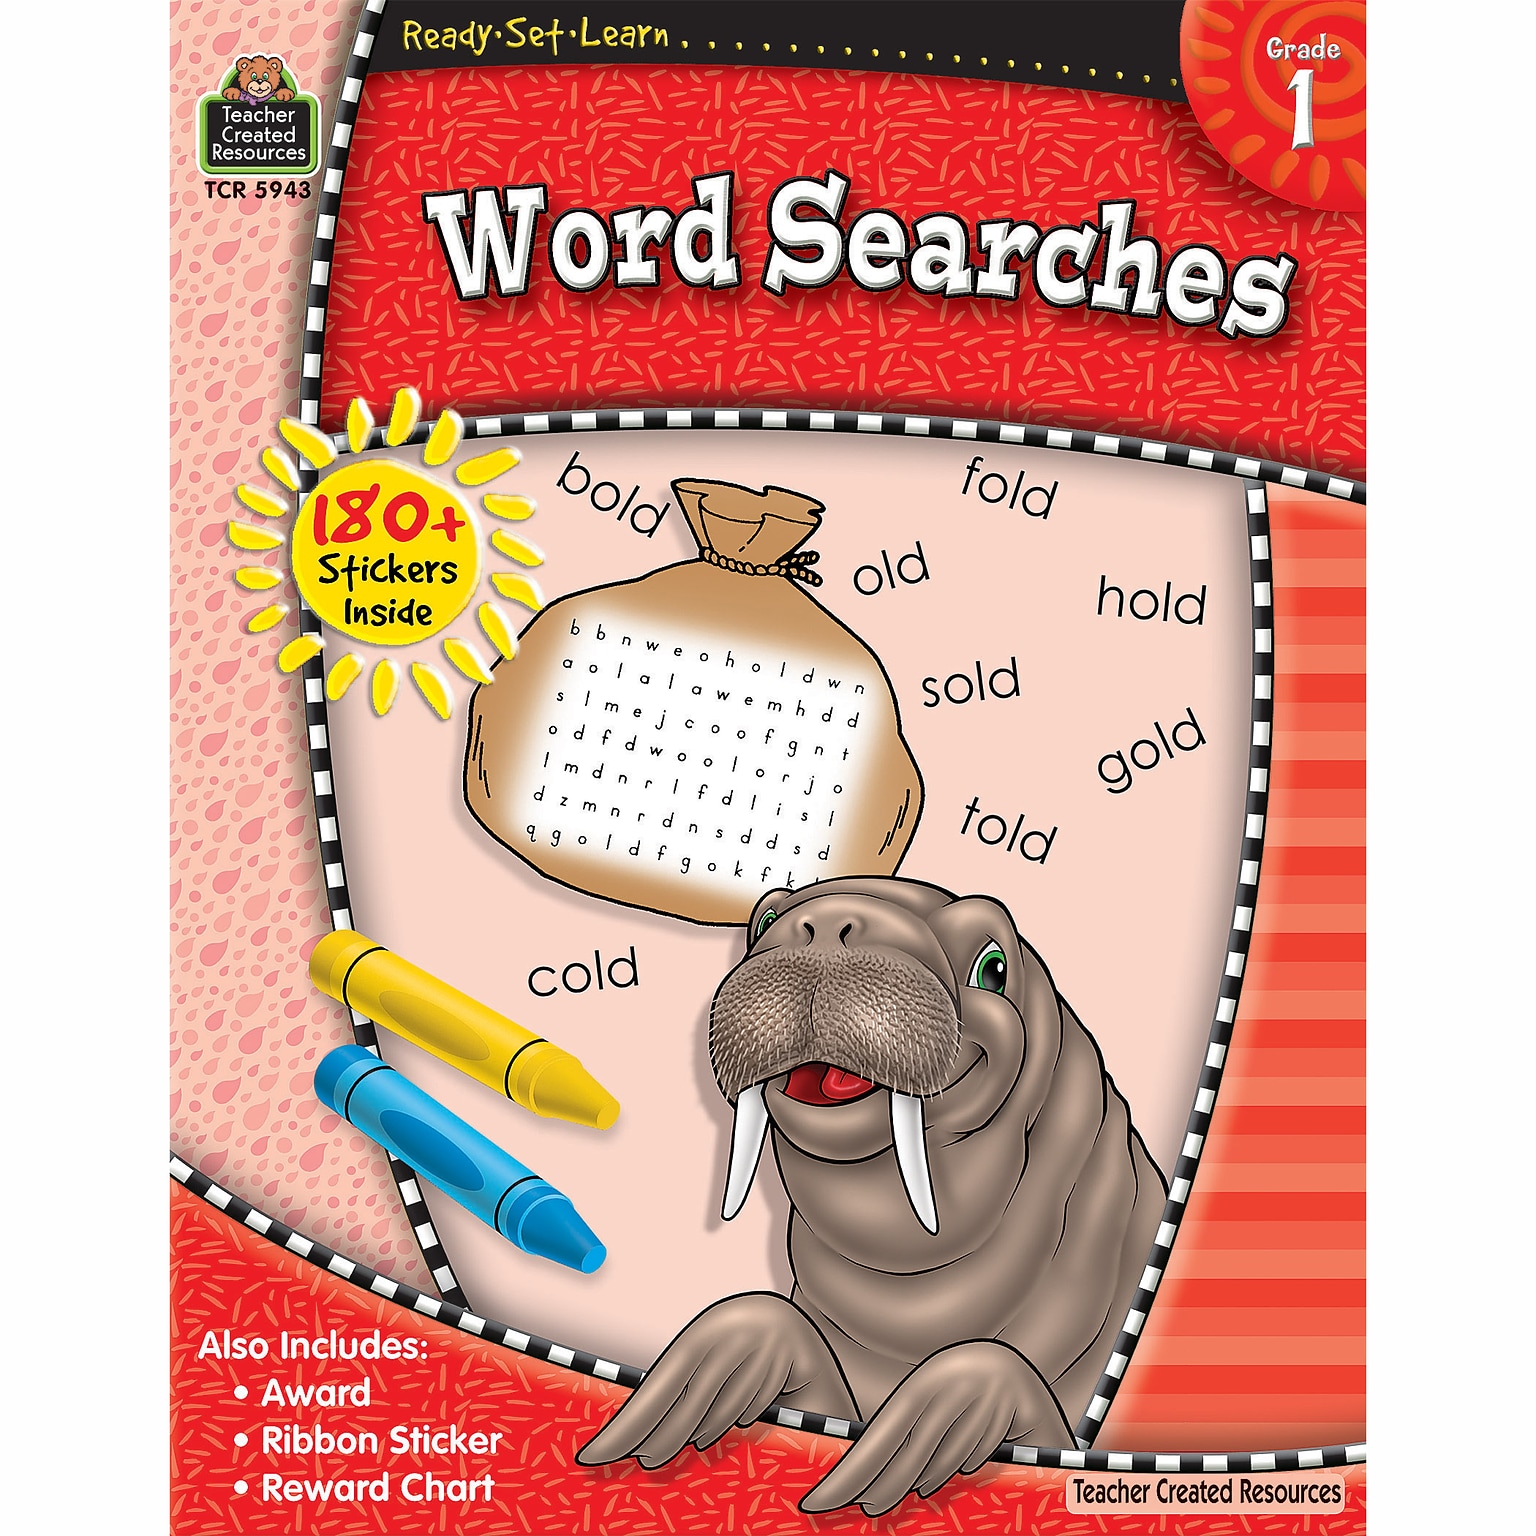 Ready•Set•Learn: Word Searches, Grade 1